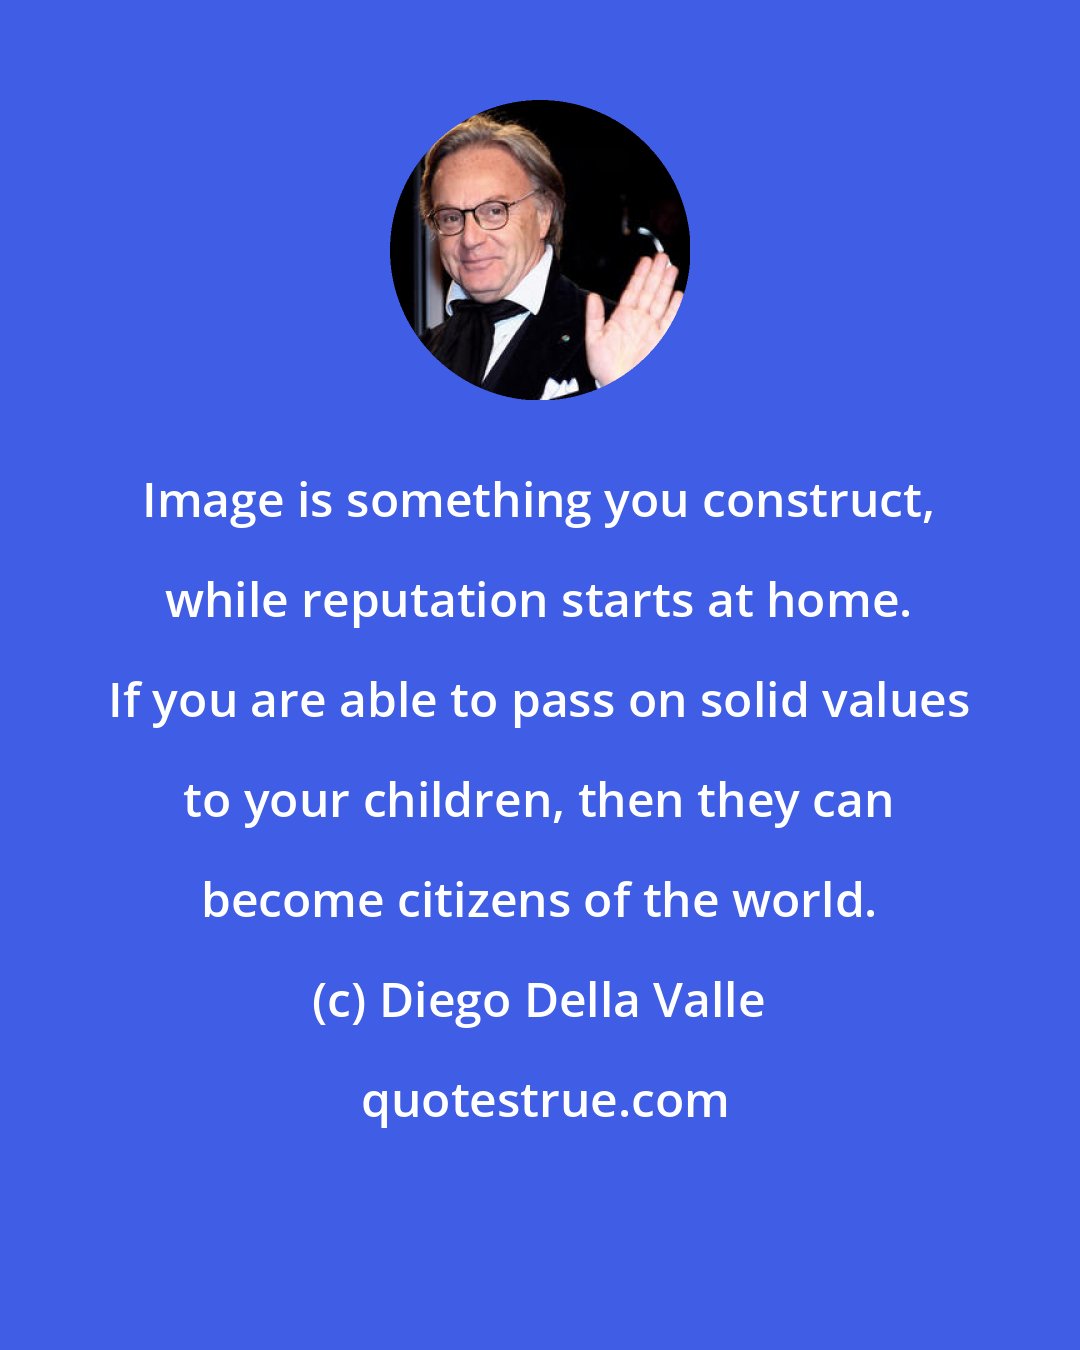 Diego Della Valle: Image is something you construct, while reputation starts at home. If you are able to pass on solid values to your children, then they can become citizens of the world.